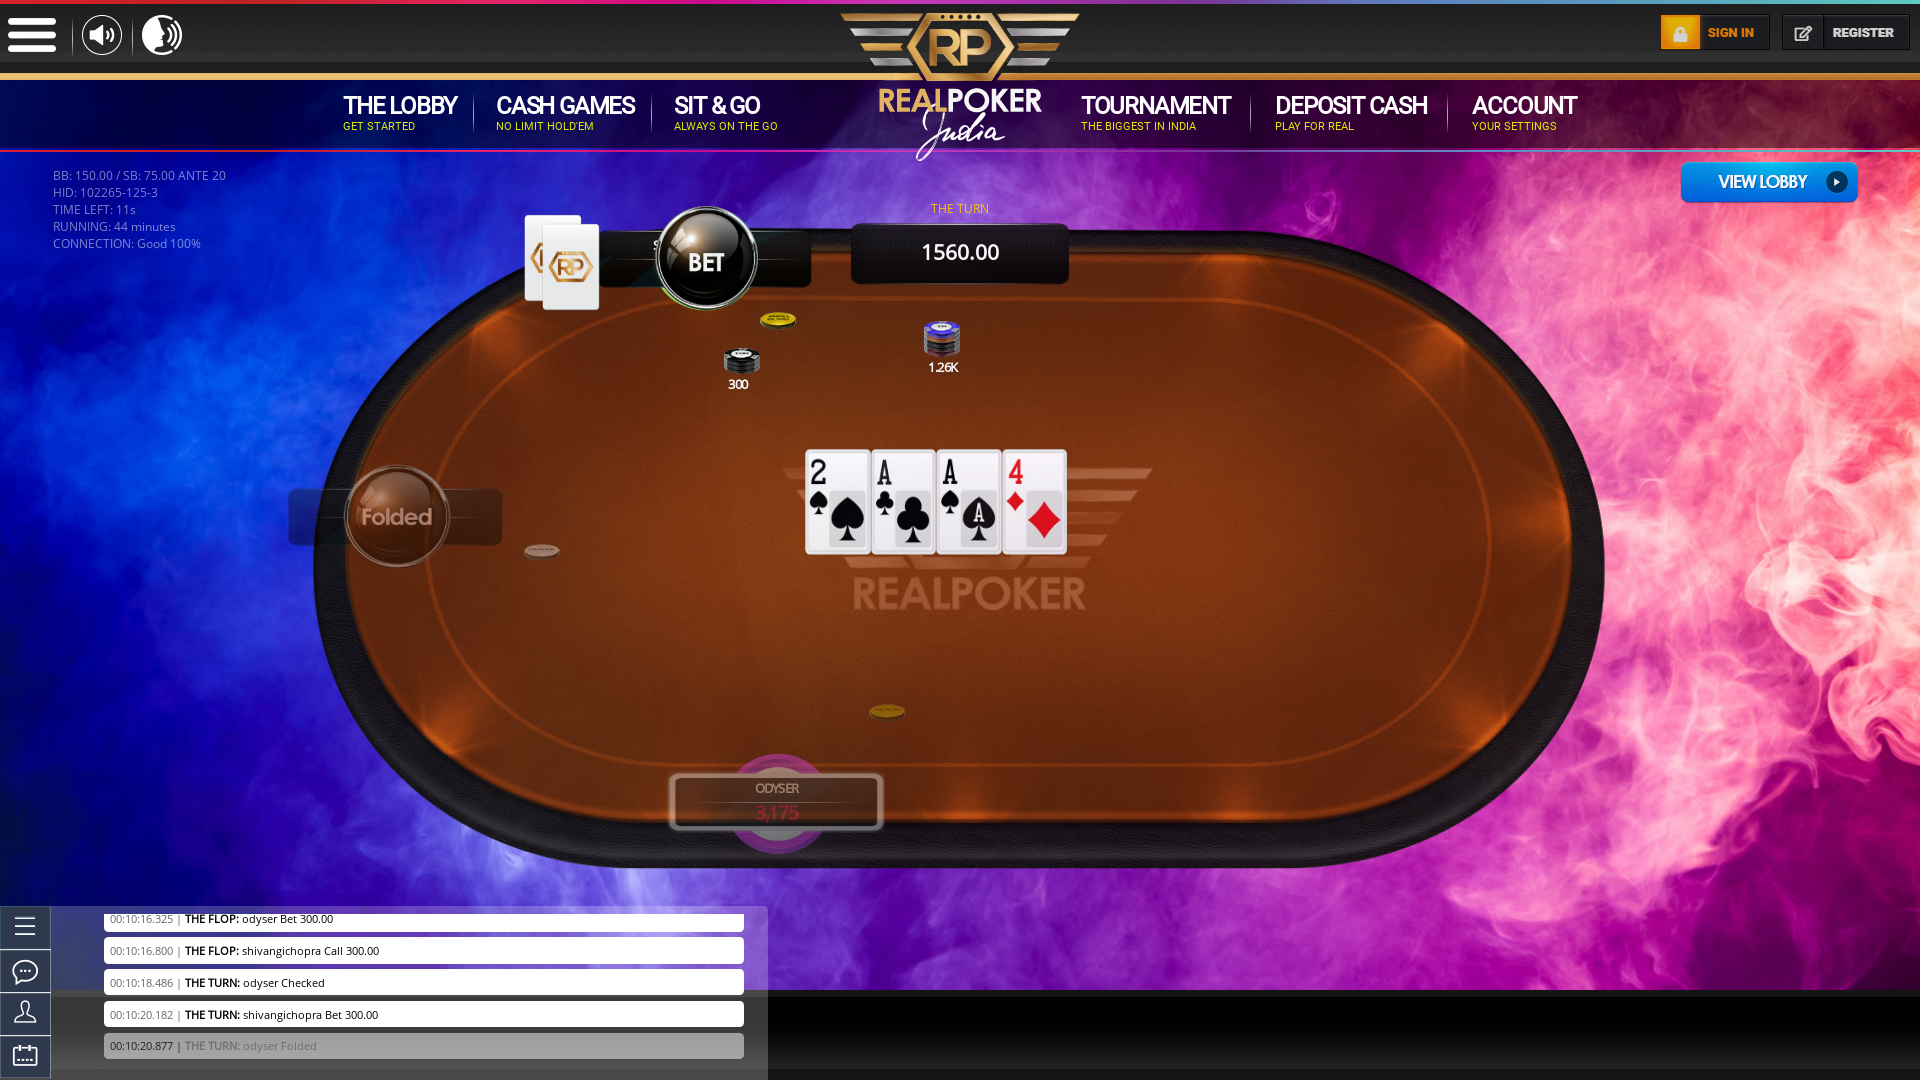 Real poker on a 10 player table in the 44th minute of the game